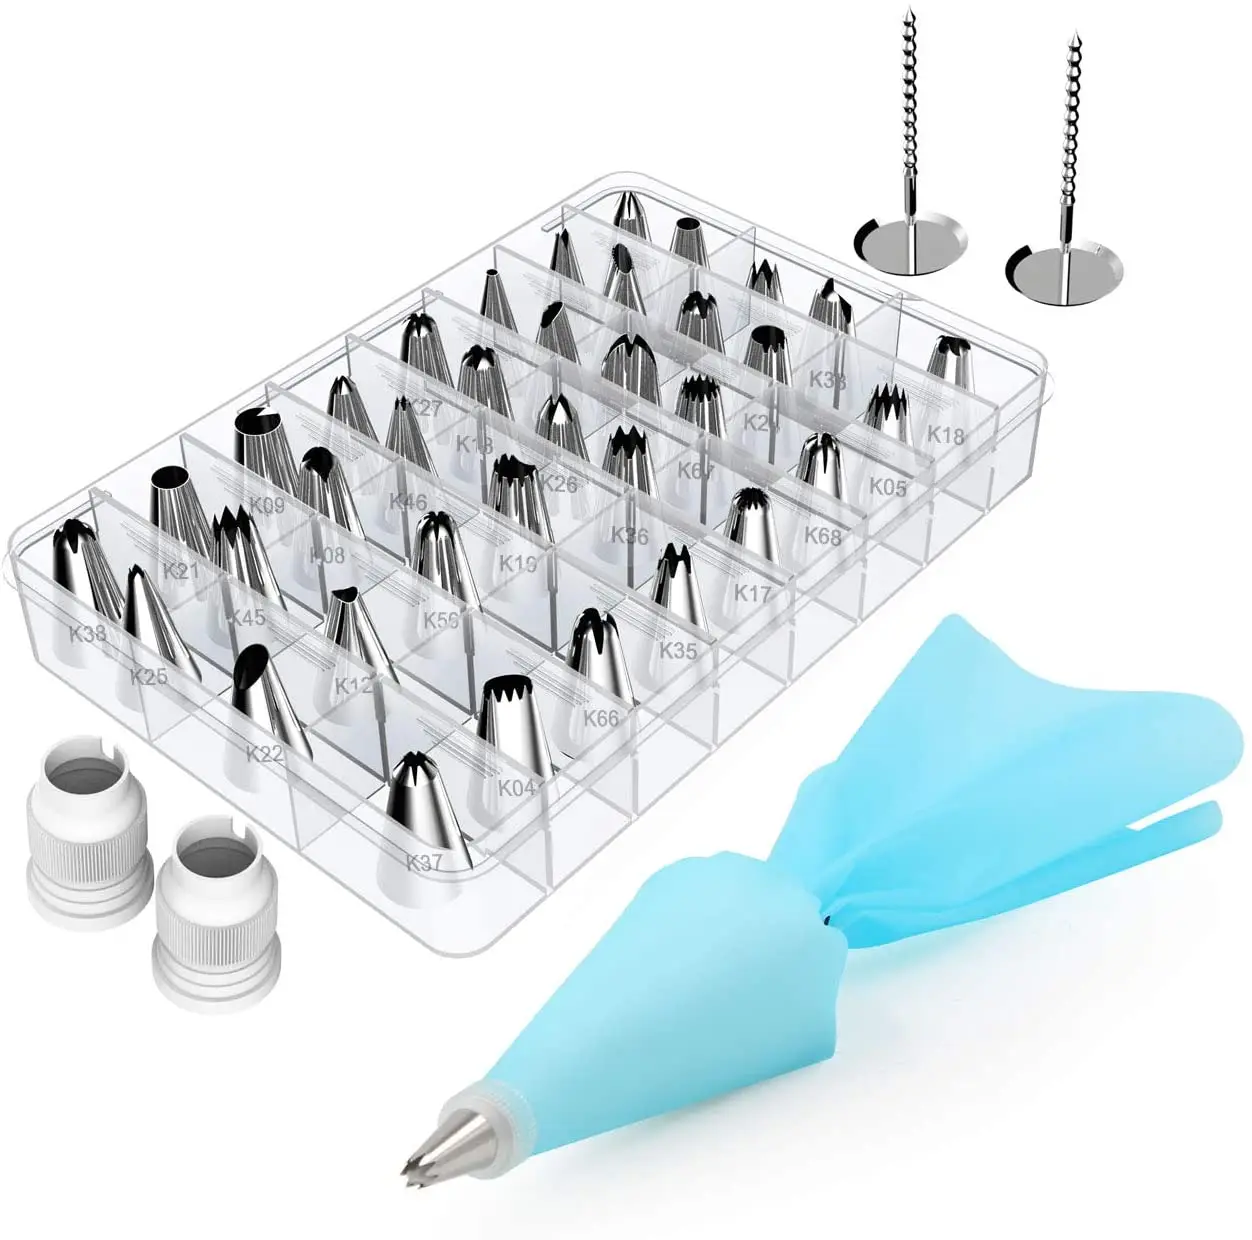 

DUMO 42Pcs Cake Tools Stainless Steel Icing Pipe Nozzle Silicone Pastry Bag Piping Cake Decorating Supplies Kitchen Accessories